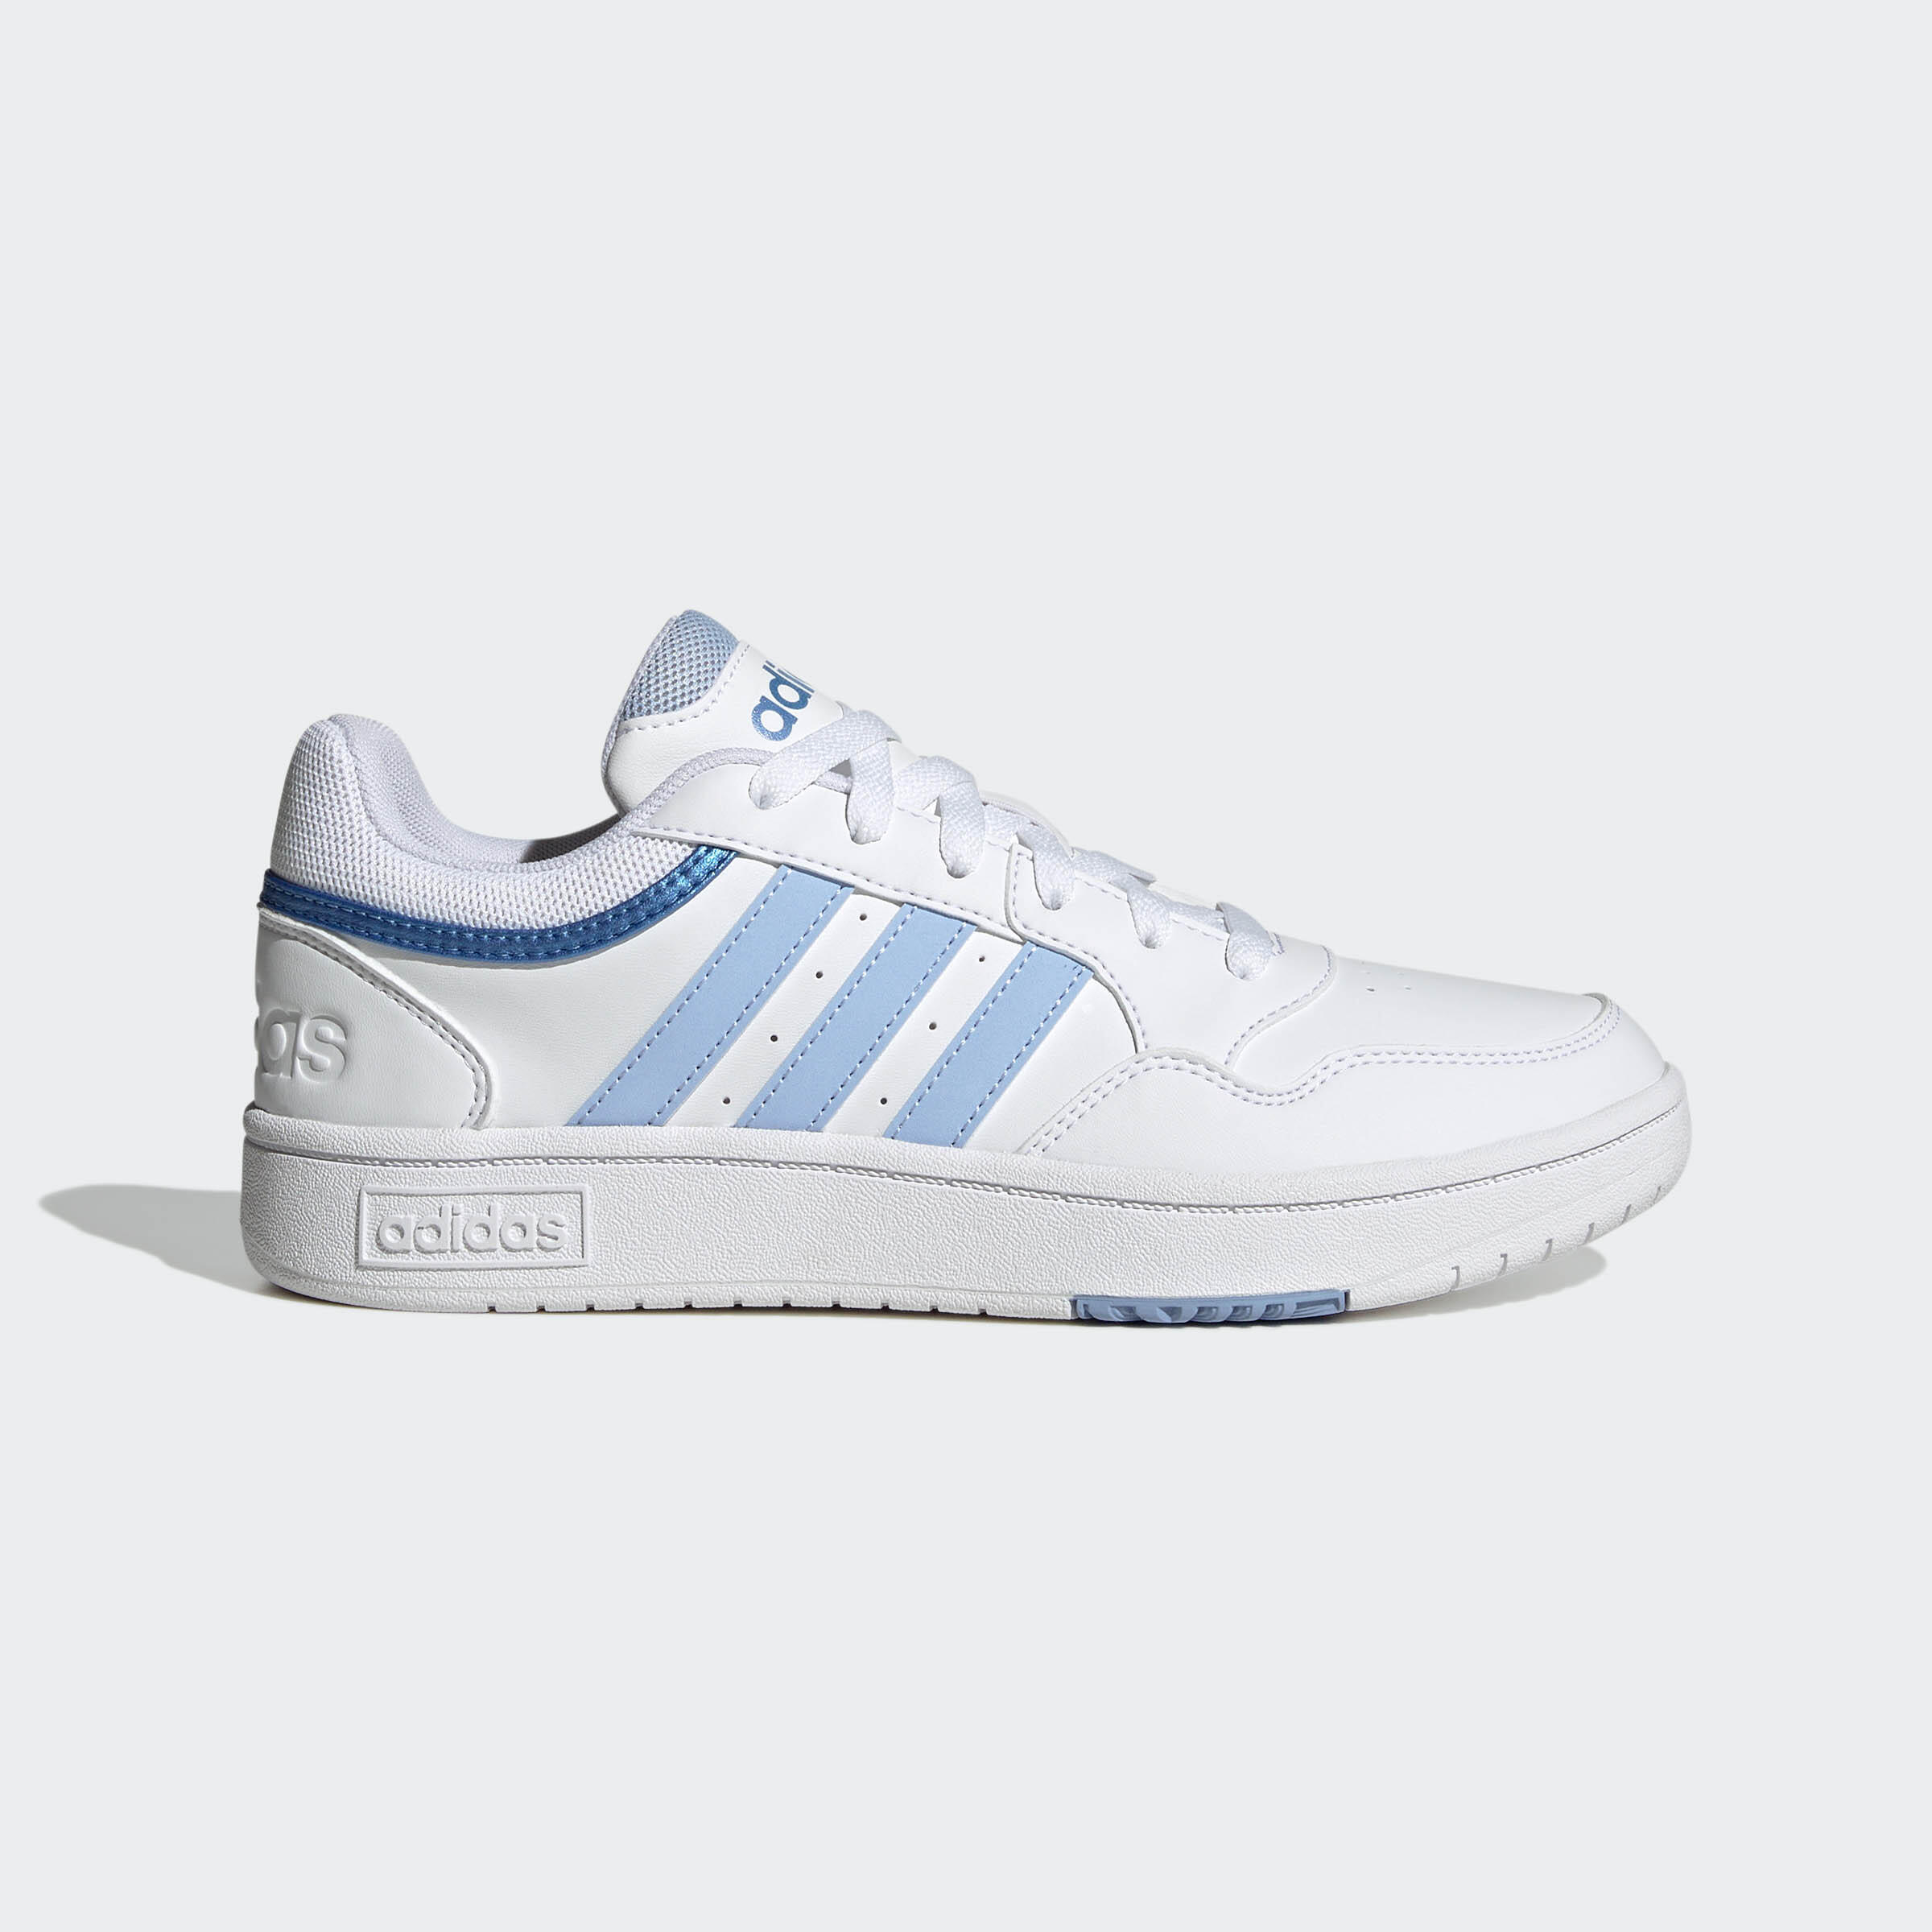 WOMEN'S ADIDAS HOOPS 3.0 SHOES - WHITE 1/5